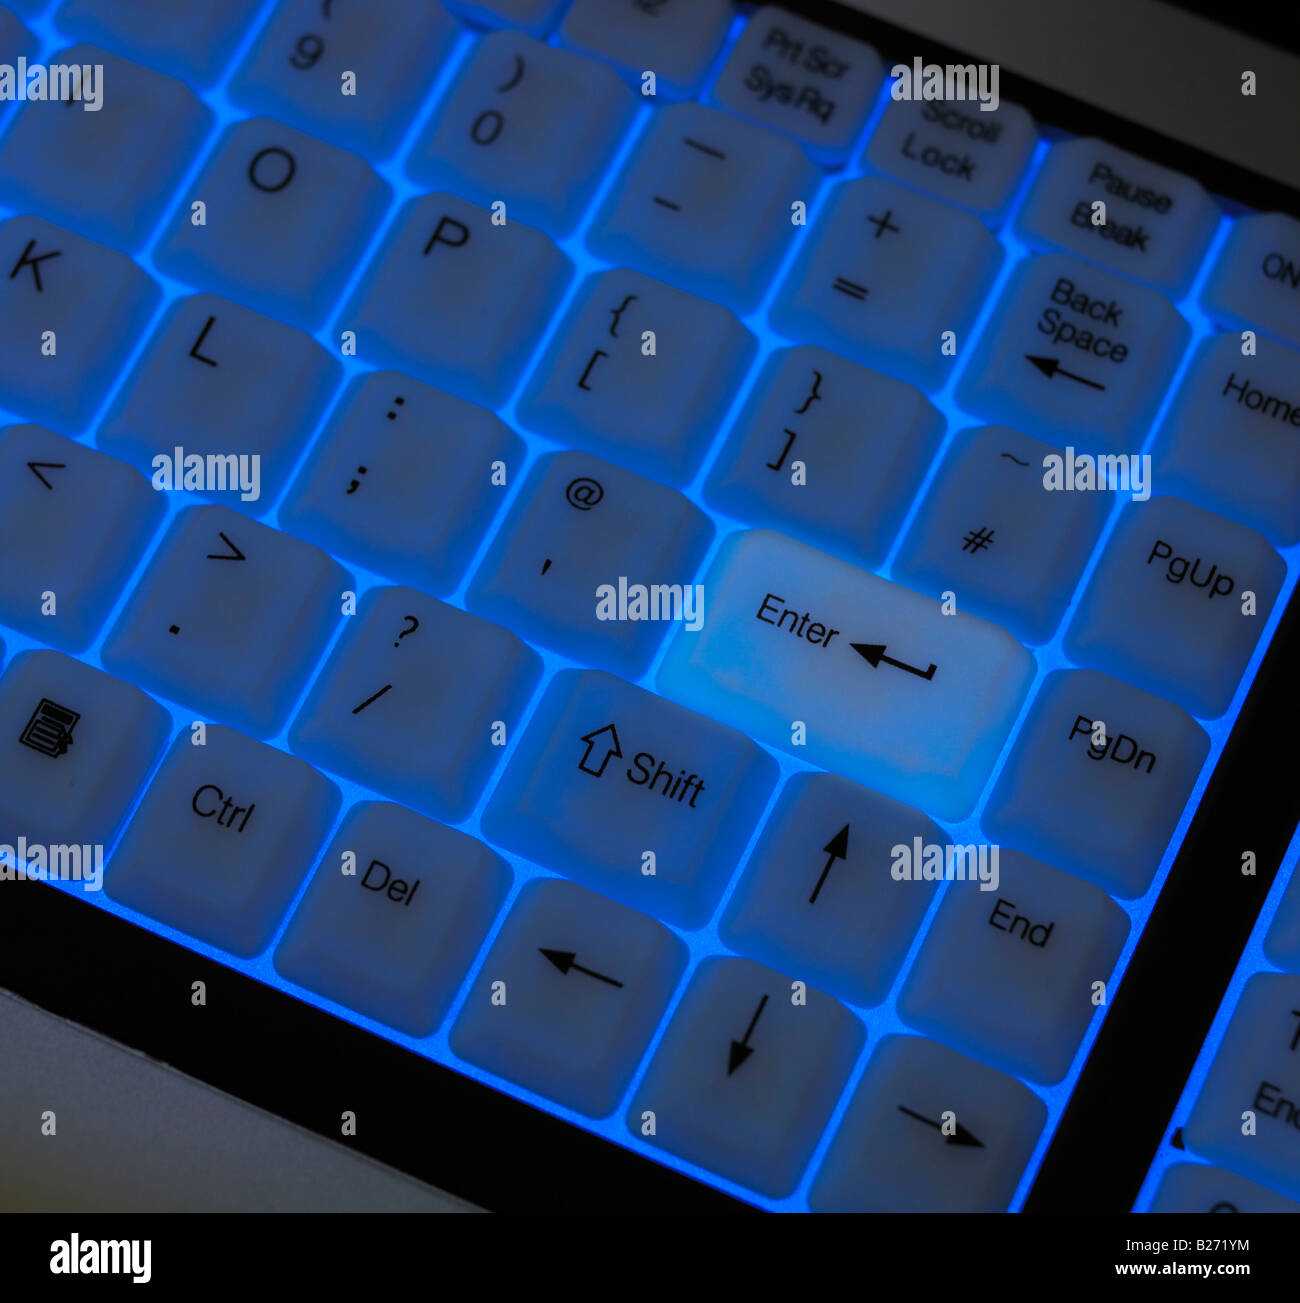 COMPUTER KEYBOARD WITH BLUE LED BACK LIGHT Stock Photo